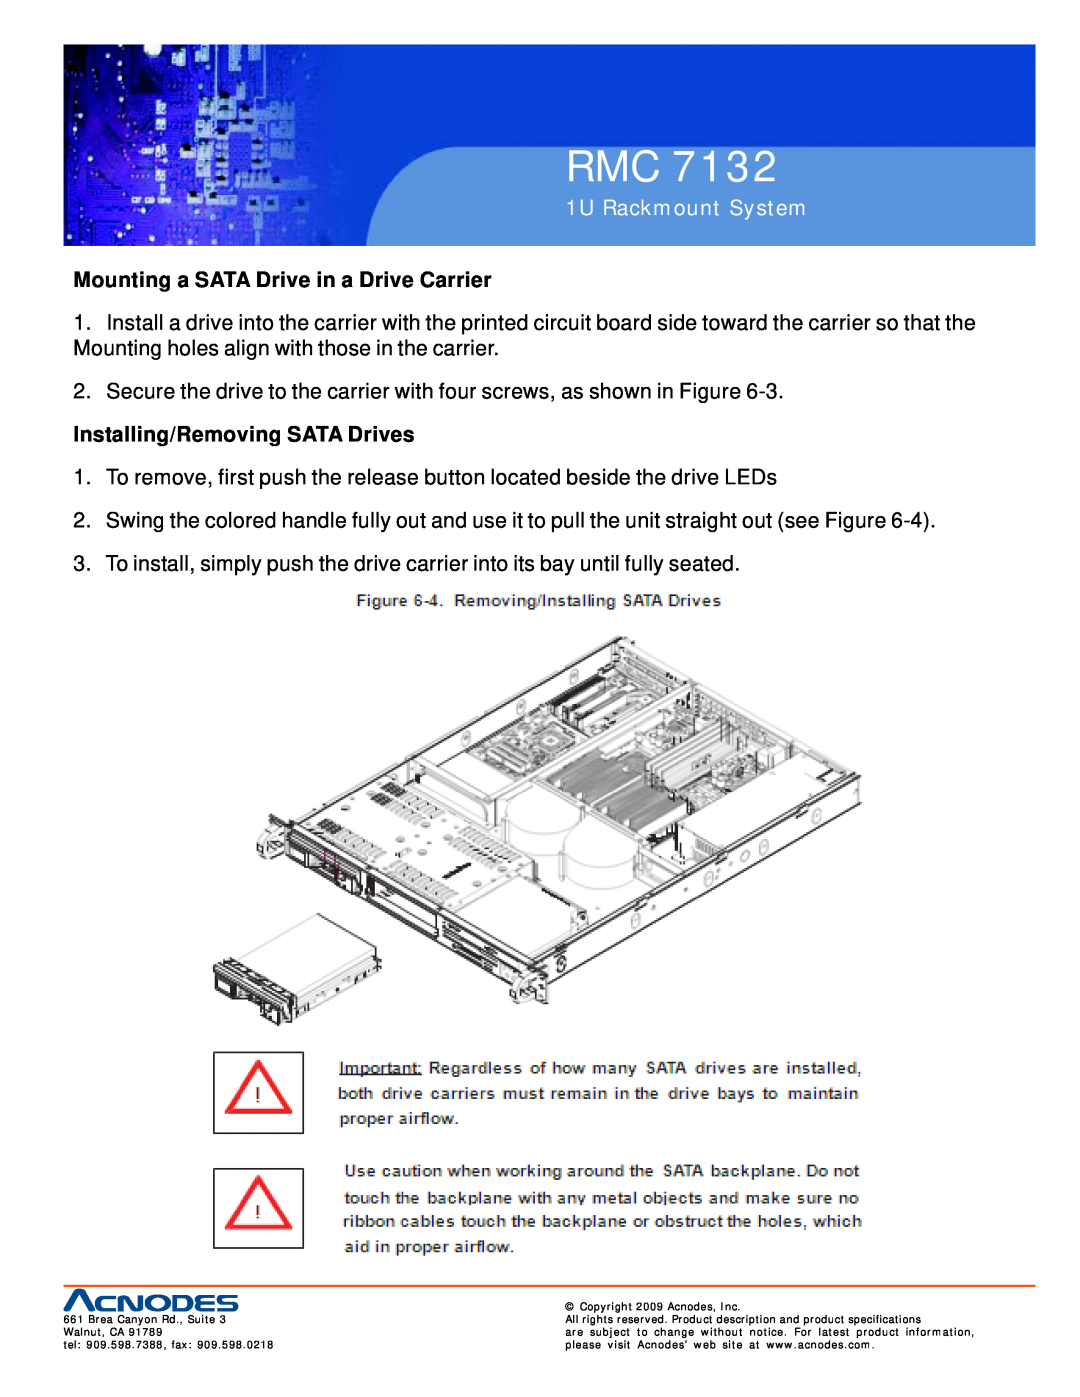 Acnodes RMC 7132 user manual Mounting a SATA Drive in a Drive Carrier, Installing/Removing SATA Drives, 1U Rackmount System 